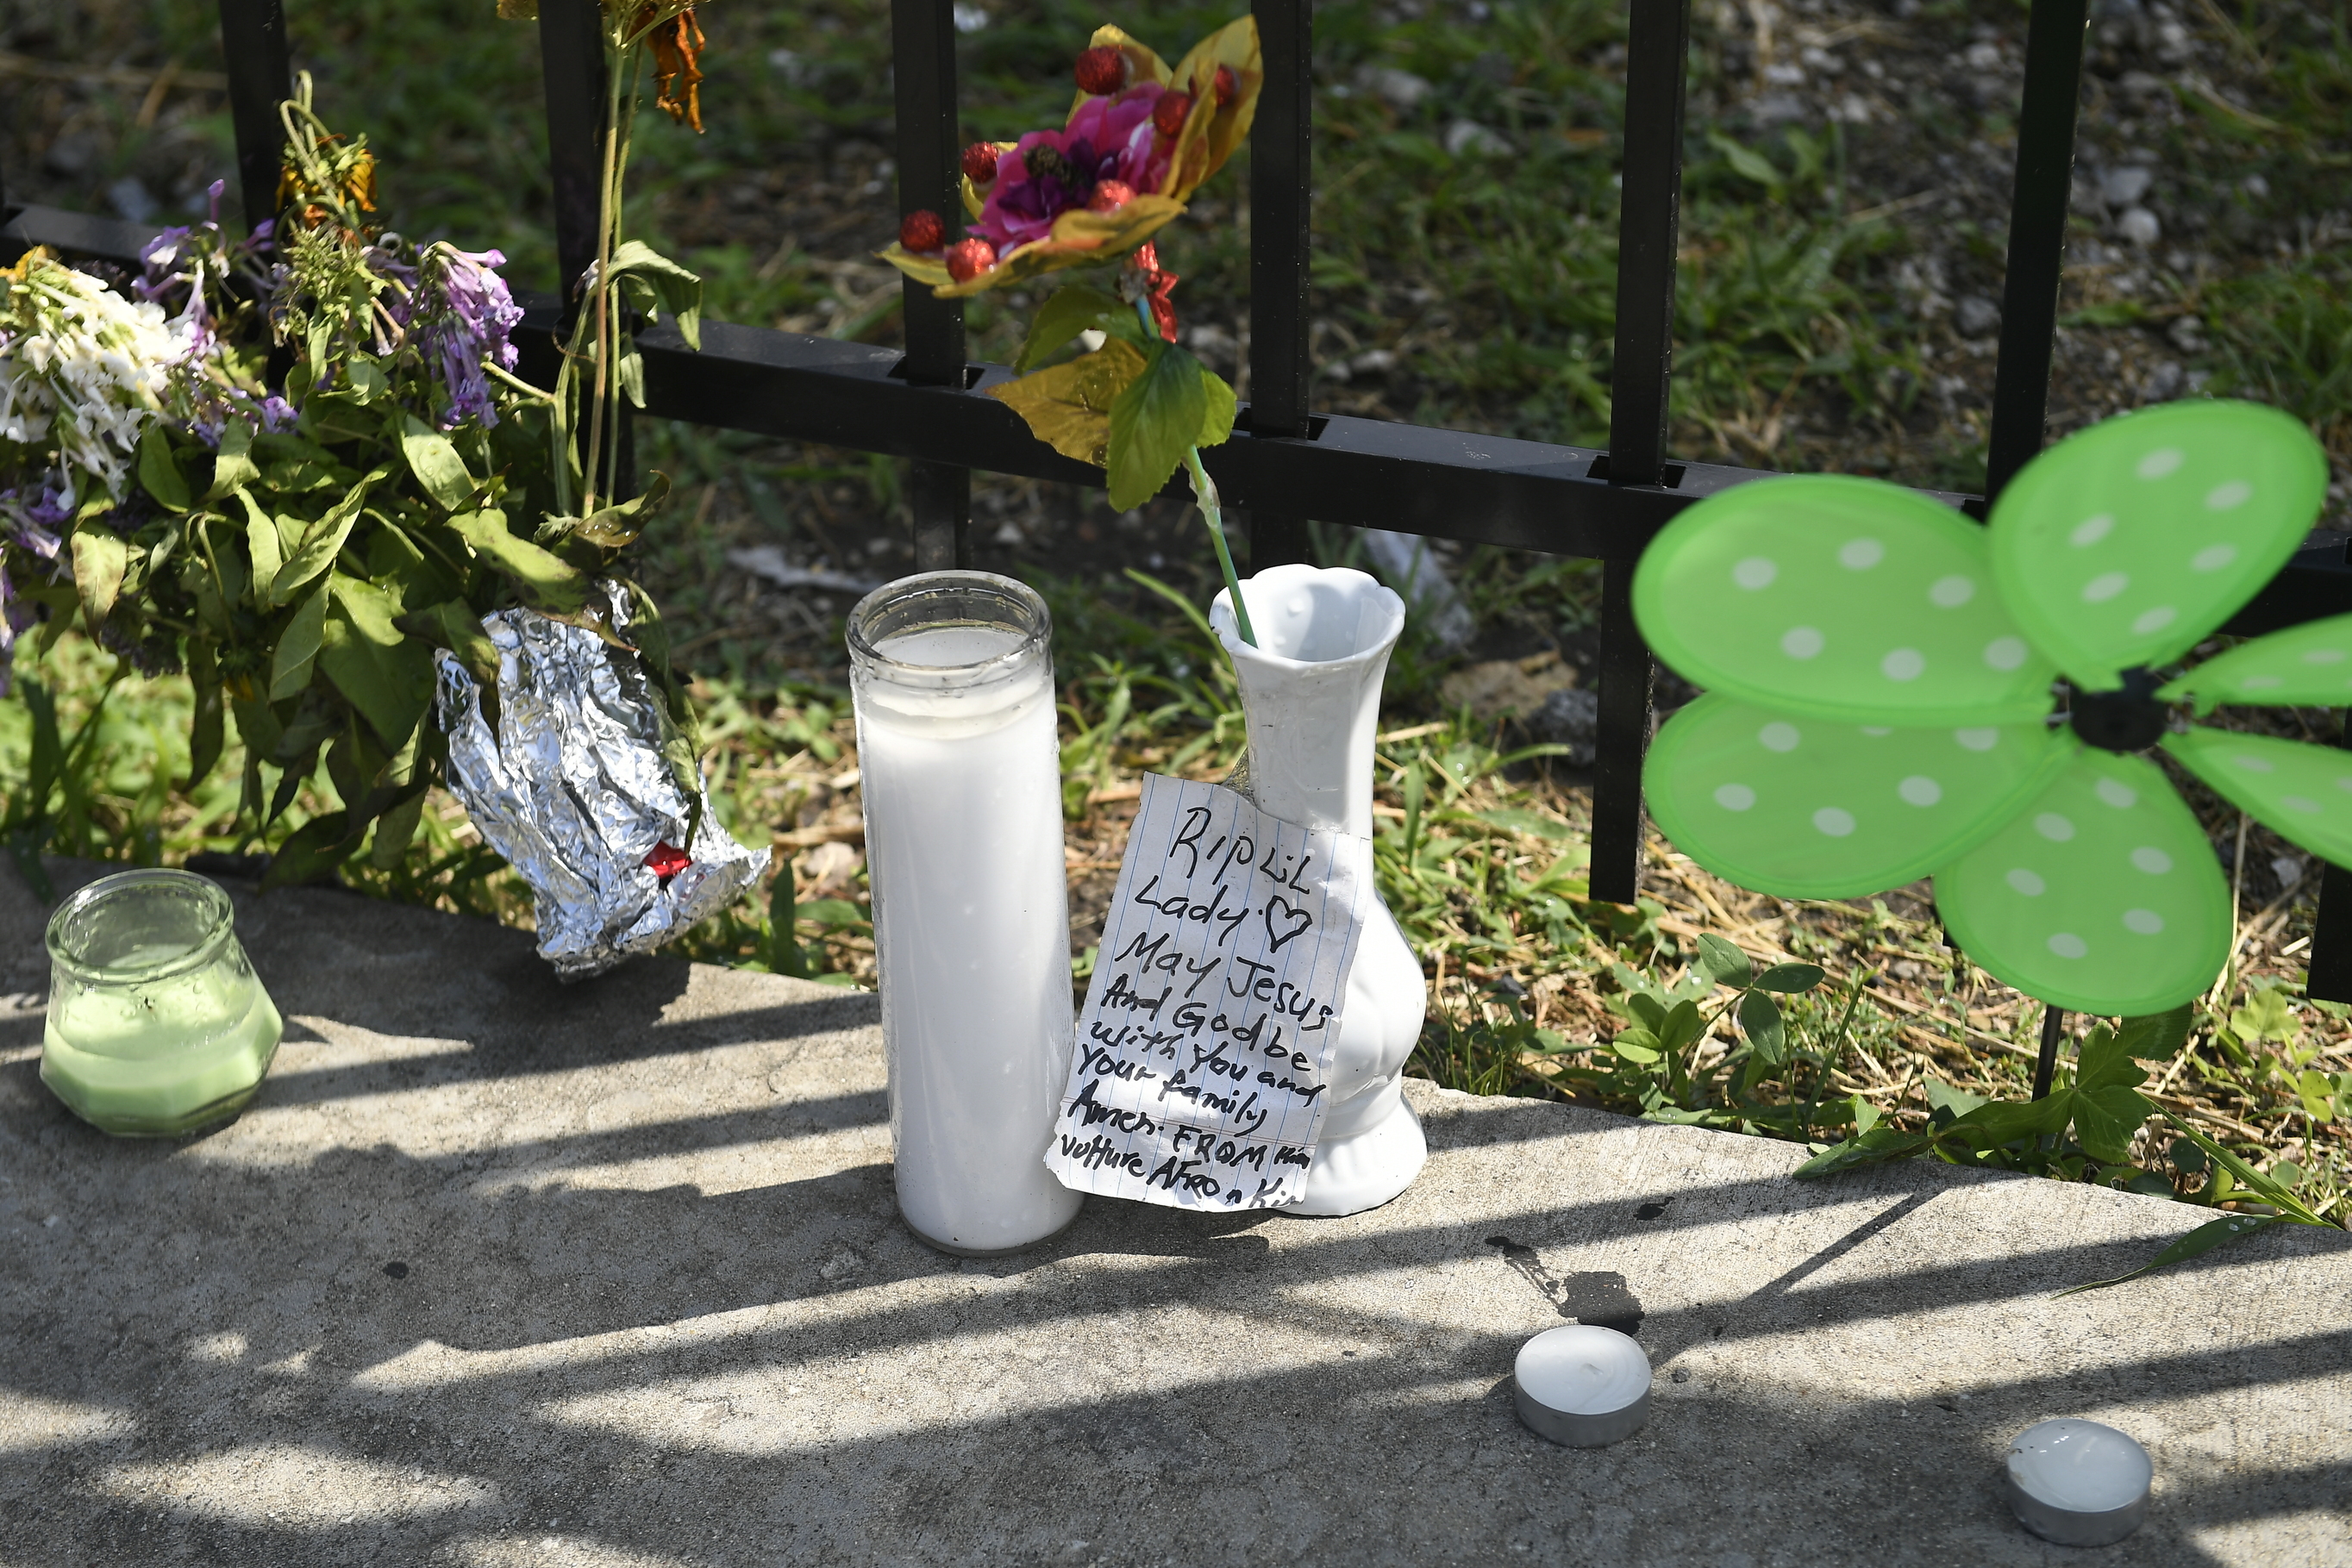 A memorial stands at 75th Street and Stewart Avenue, in Chicago, Tuesday, July 30, 2019  where two women were slain in a drive-by shooting Friday night. (John L. Alexander&mdash;AP)